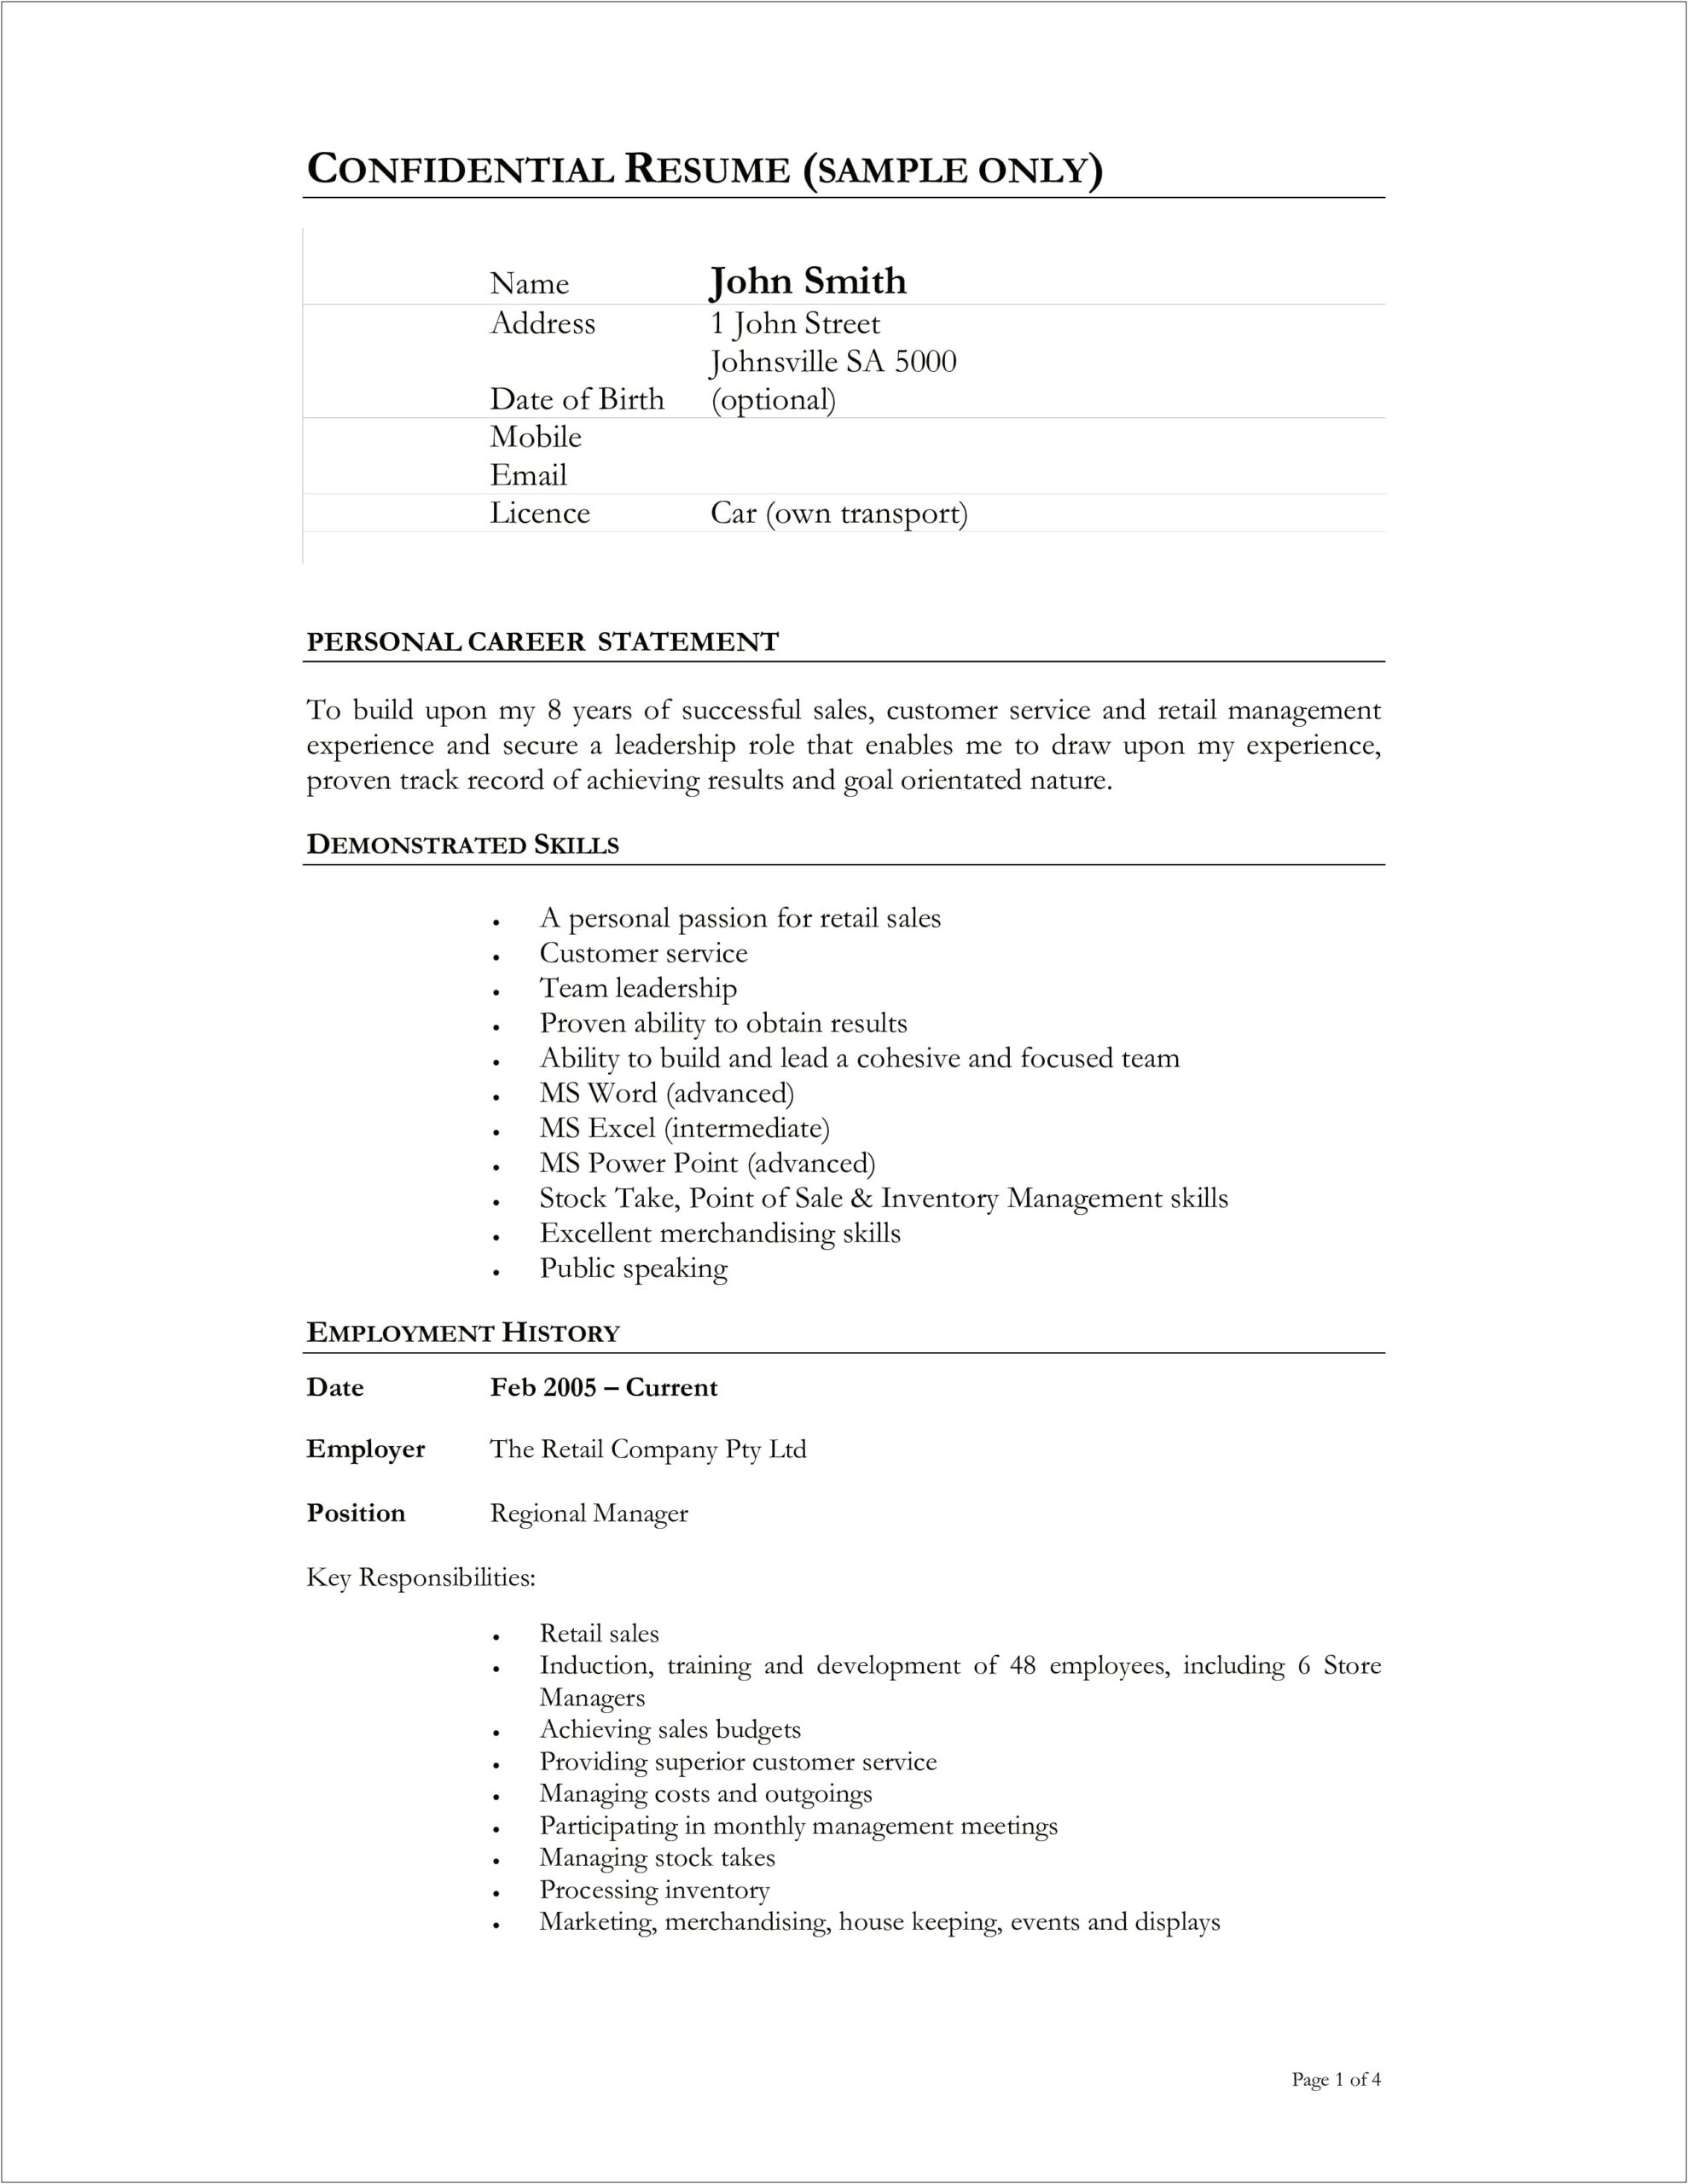 Sample Resume For Current Employer